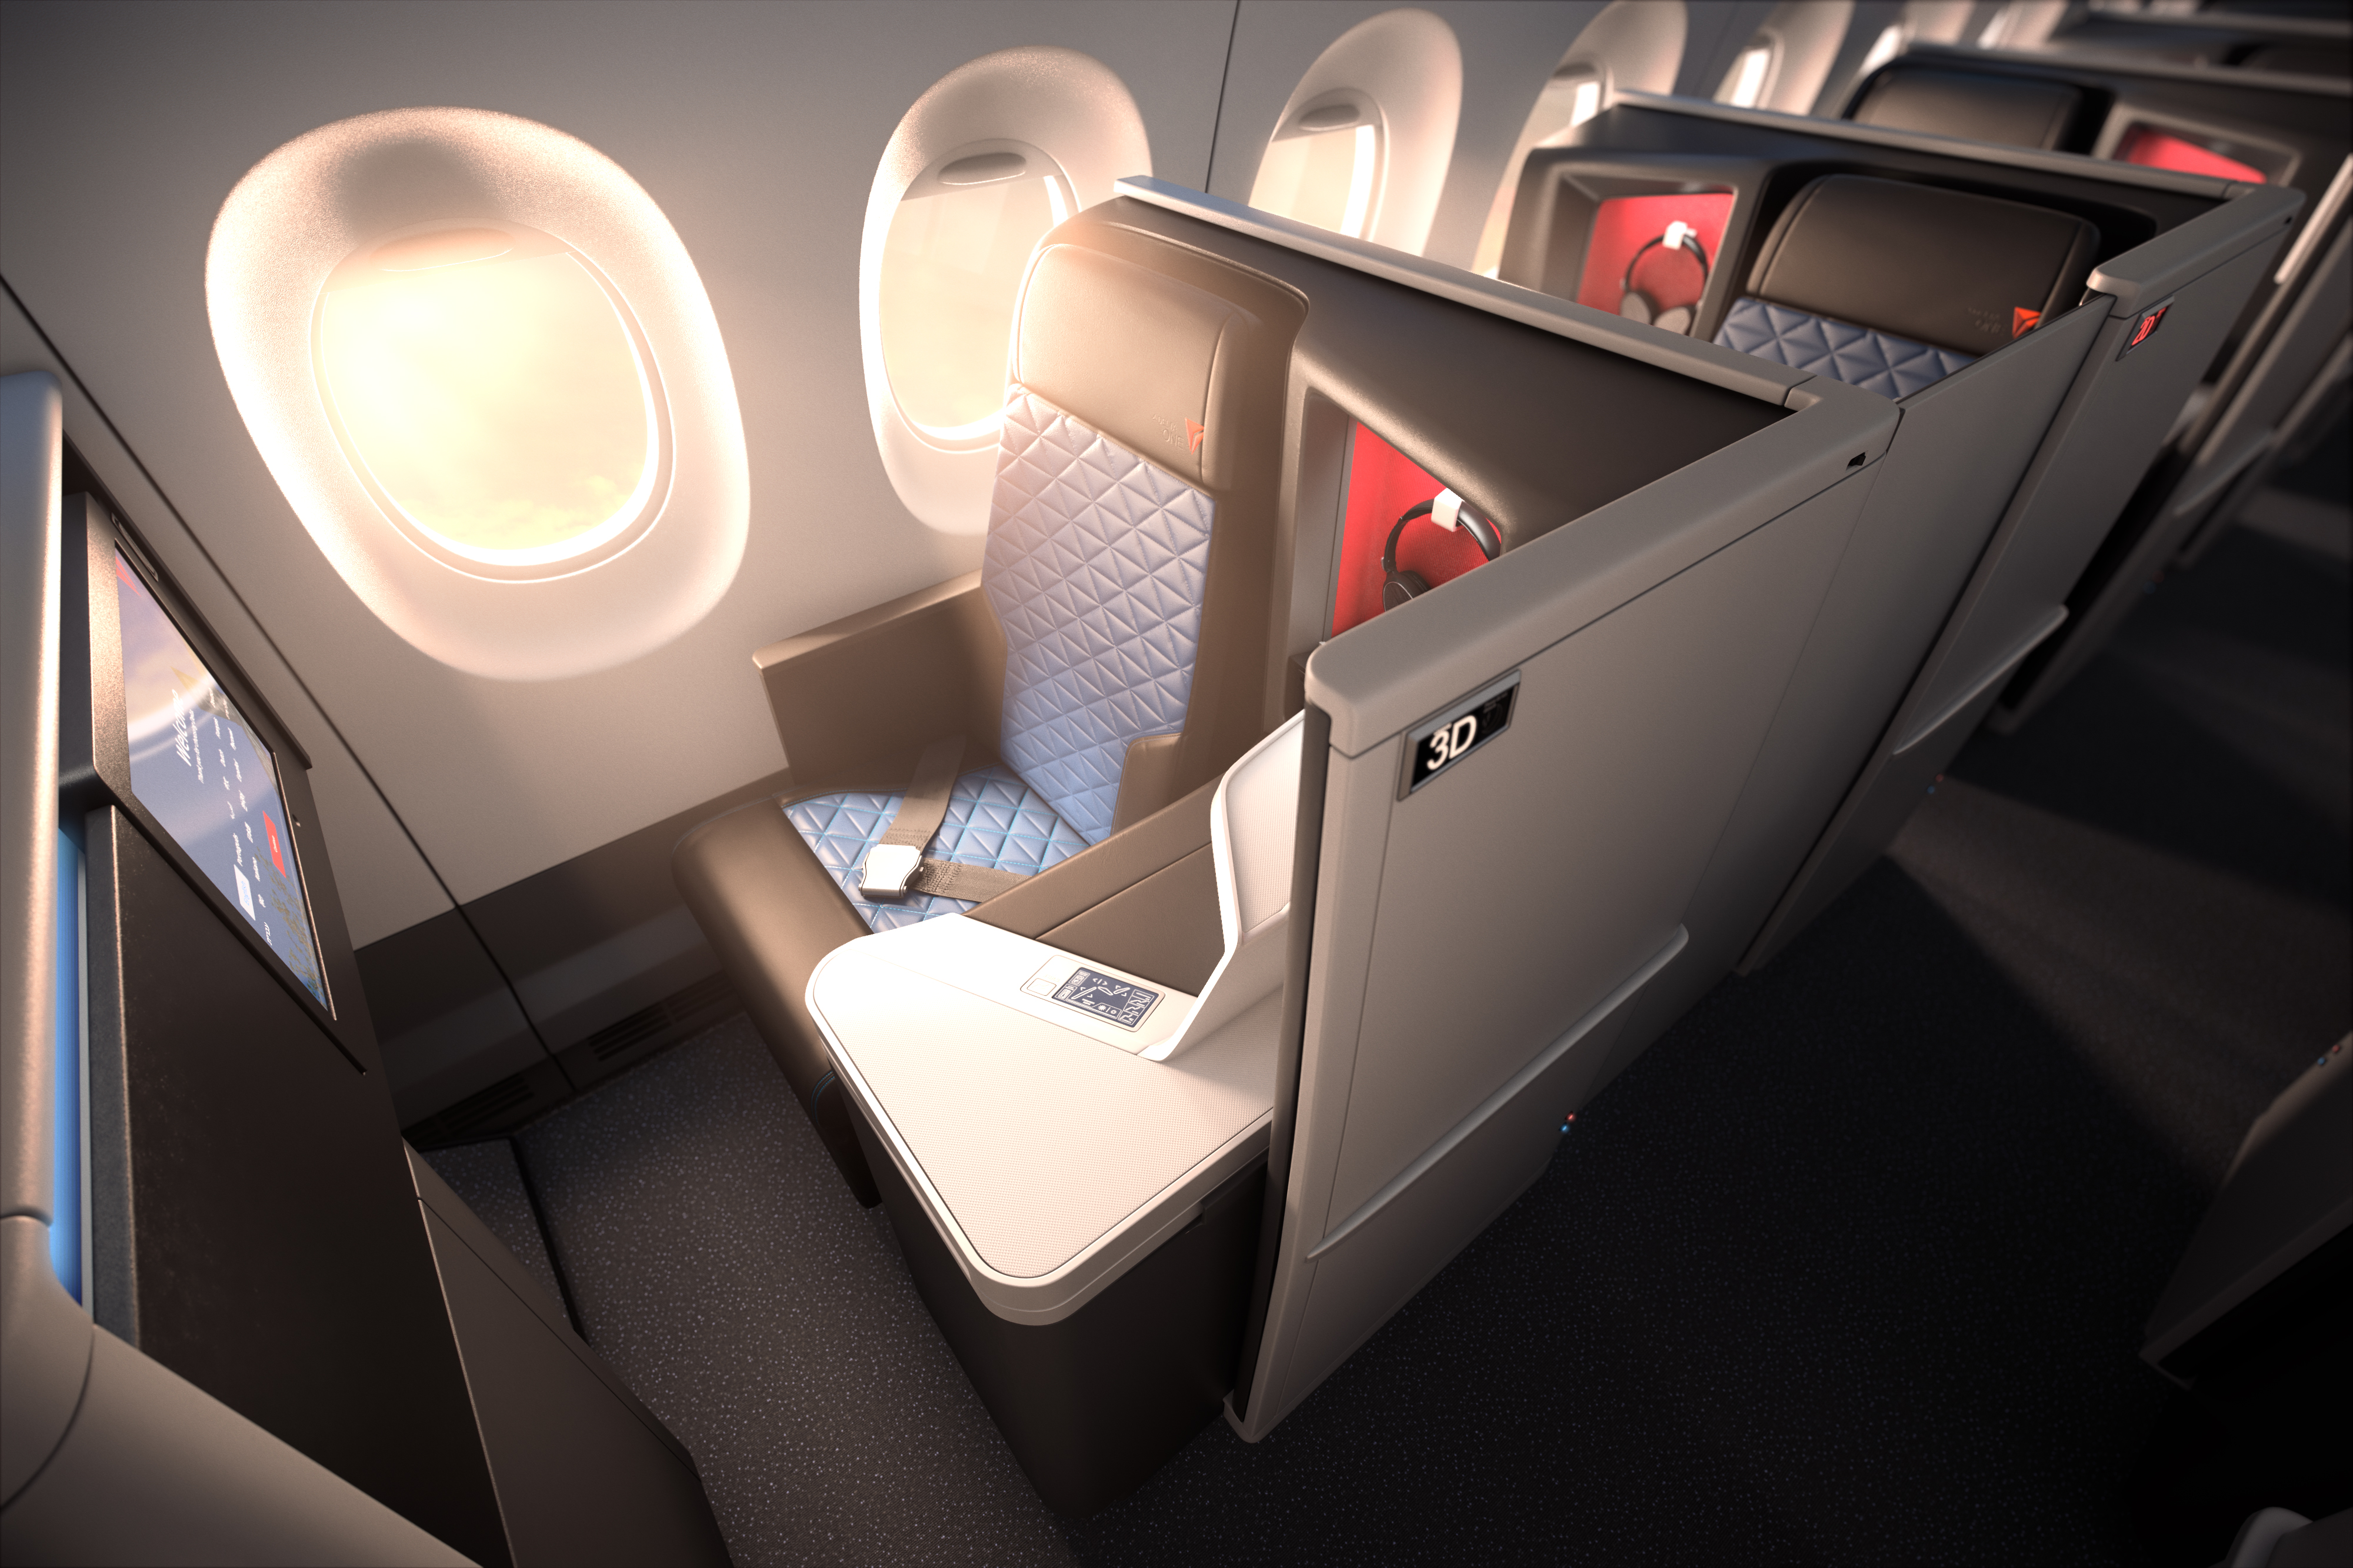 Delta Business Class Award Space To Europe Open From New York And Salt Lake City